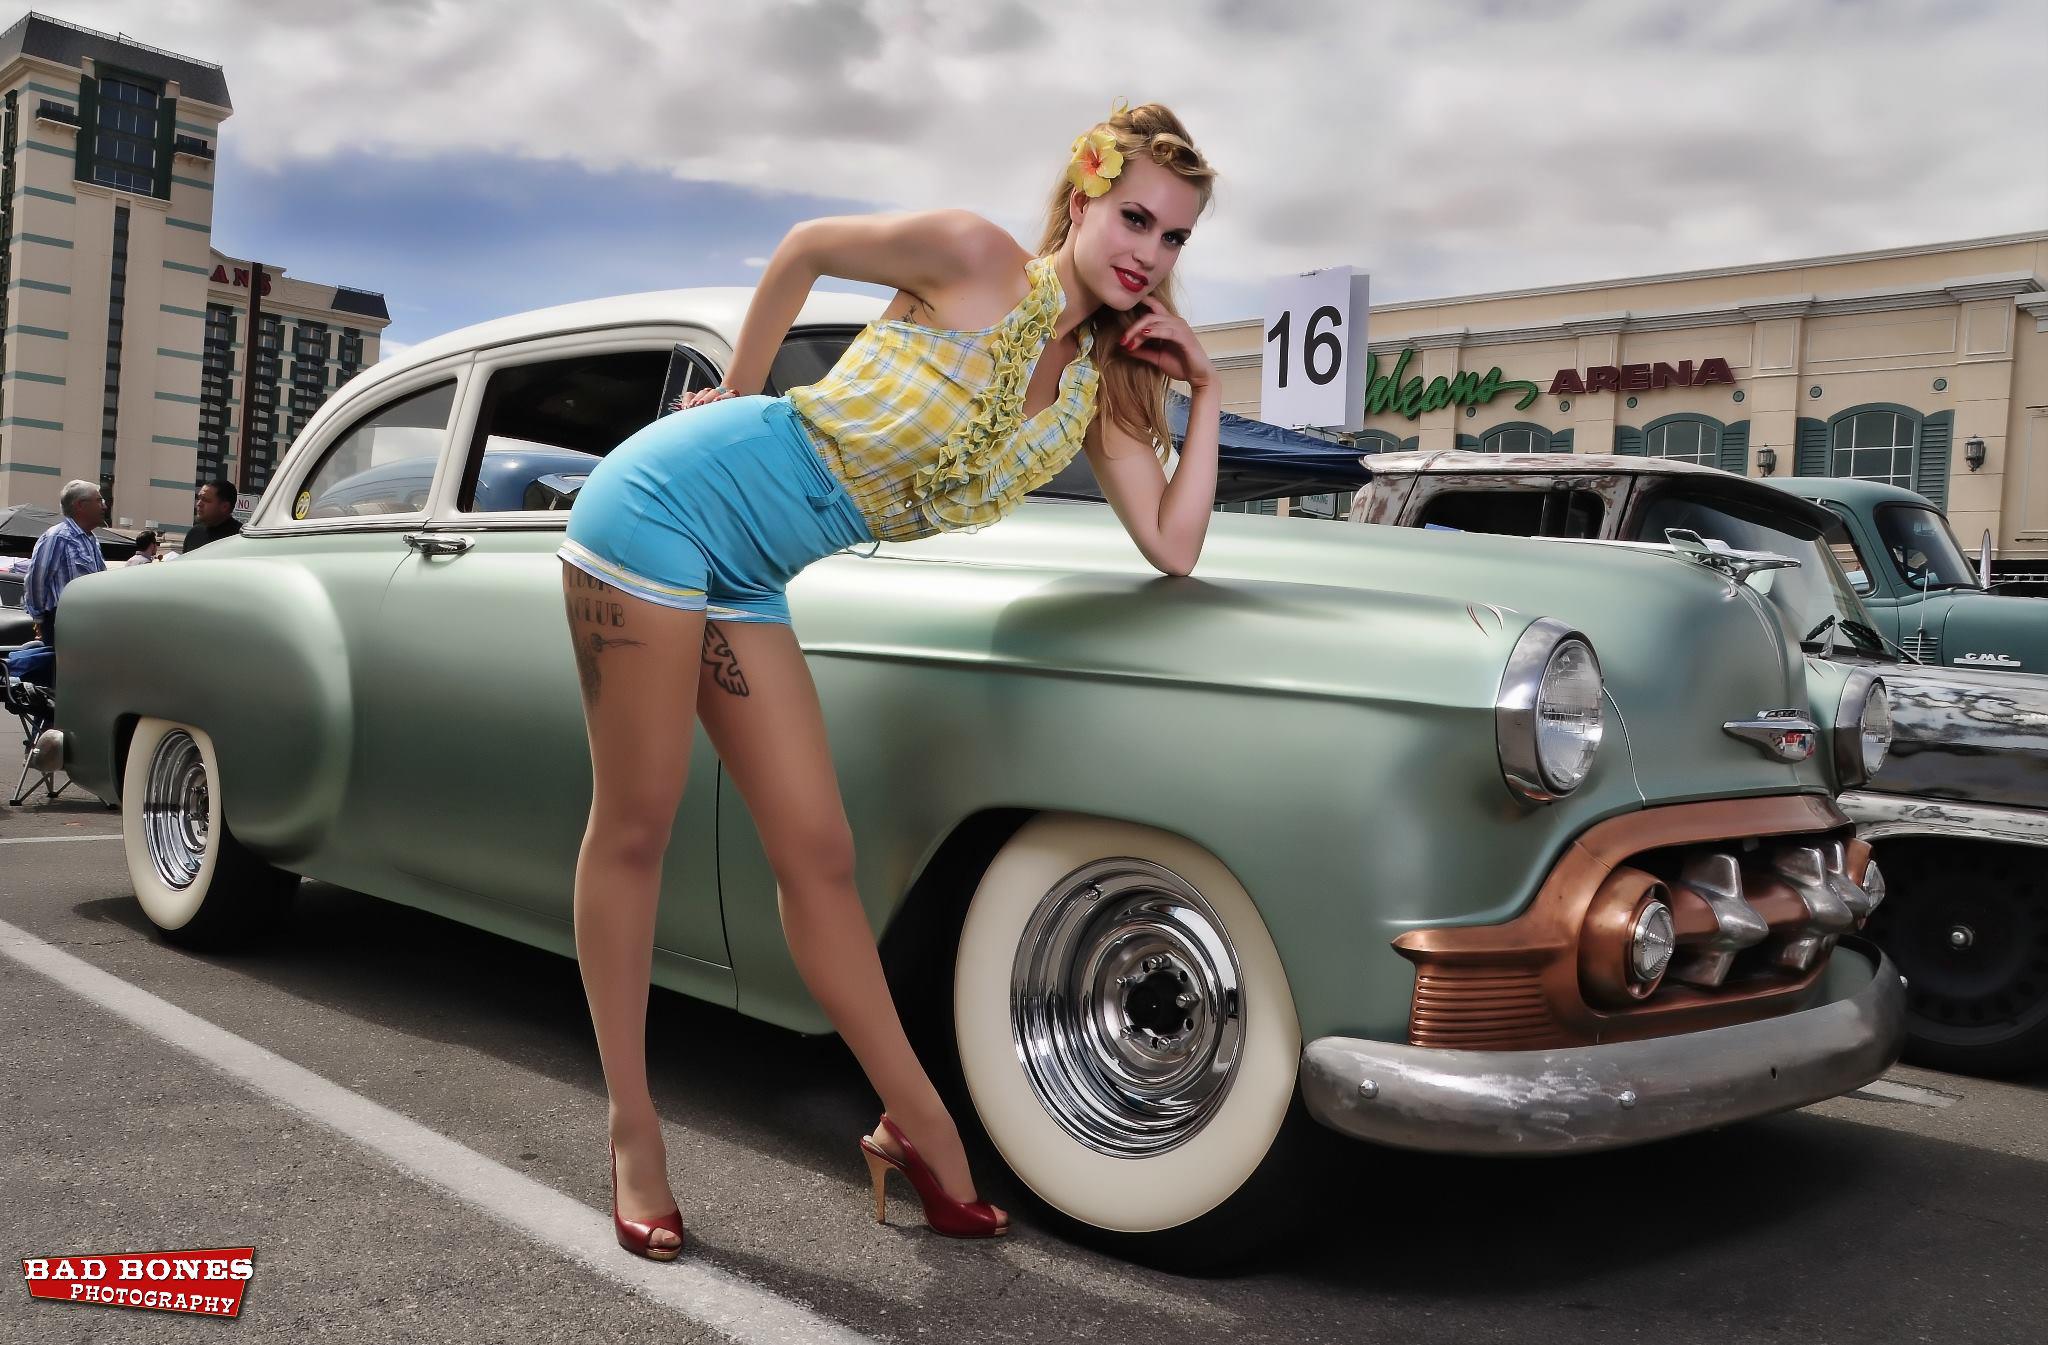 Hot Girl And Old Car - HD Wallpaper 